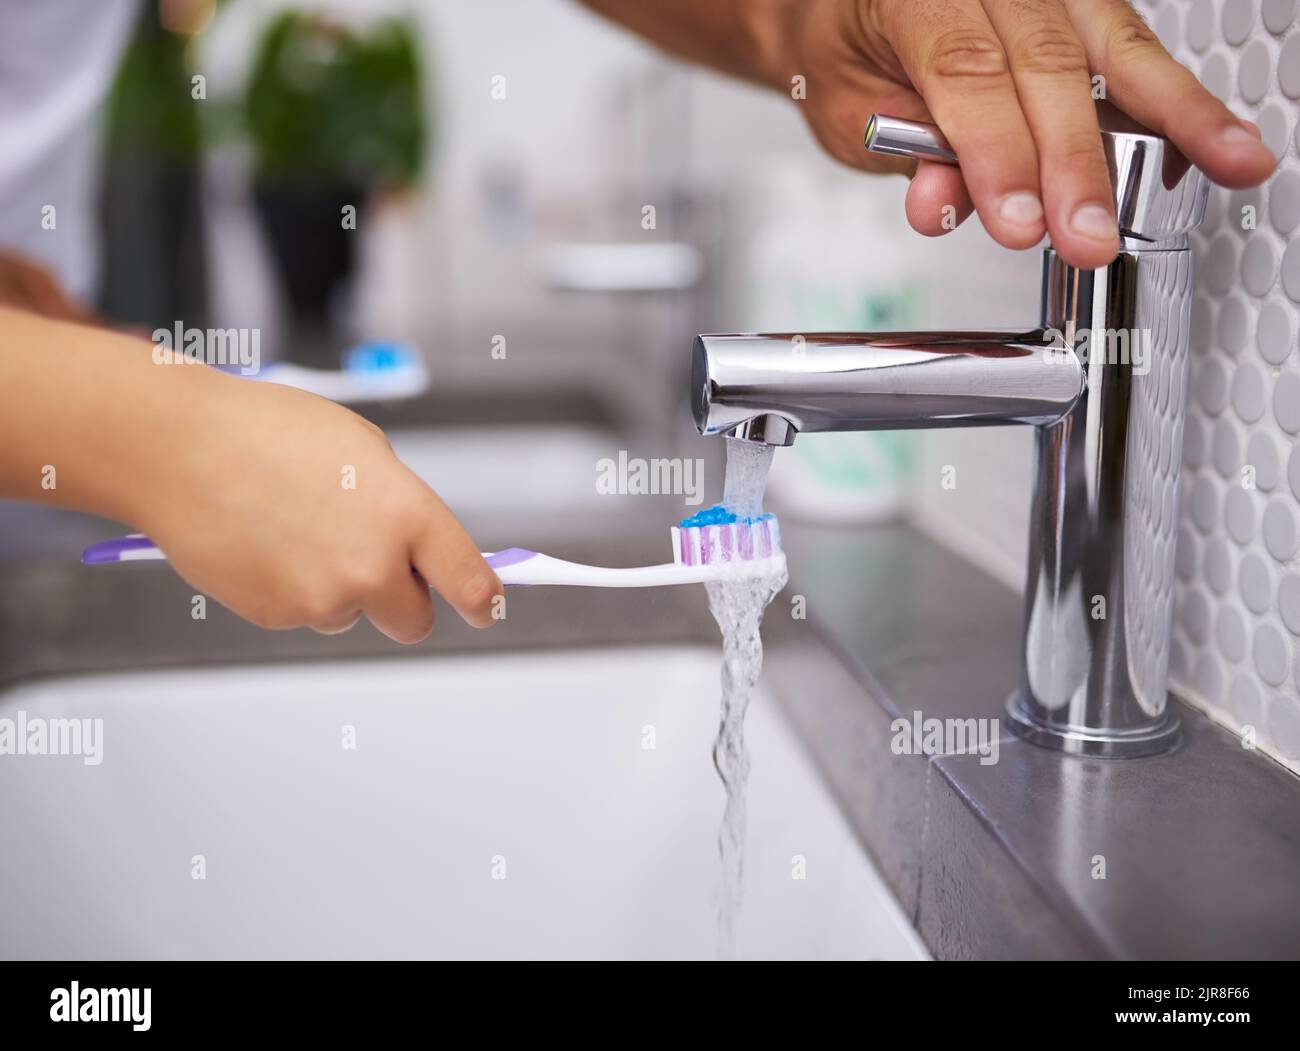 One process of brushing your teeth. an unrecognizable man opening the tap while an unrecognizable child wets their toothbrush in the bathroom at home. Stock Photo